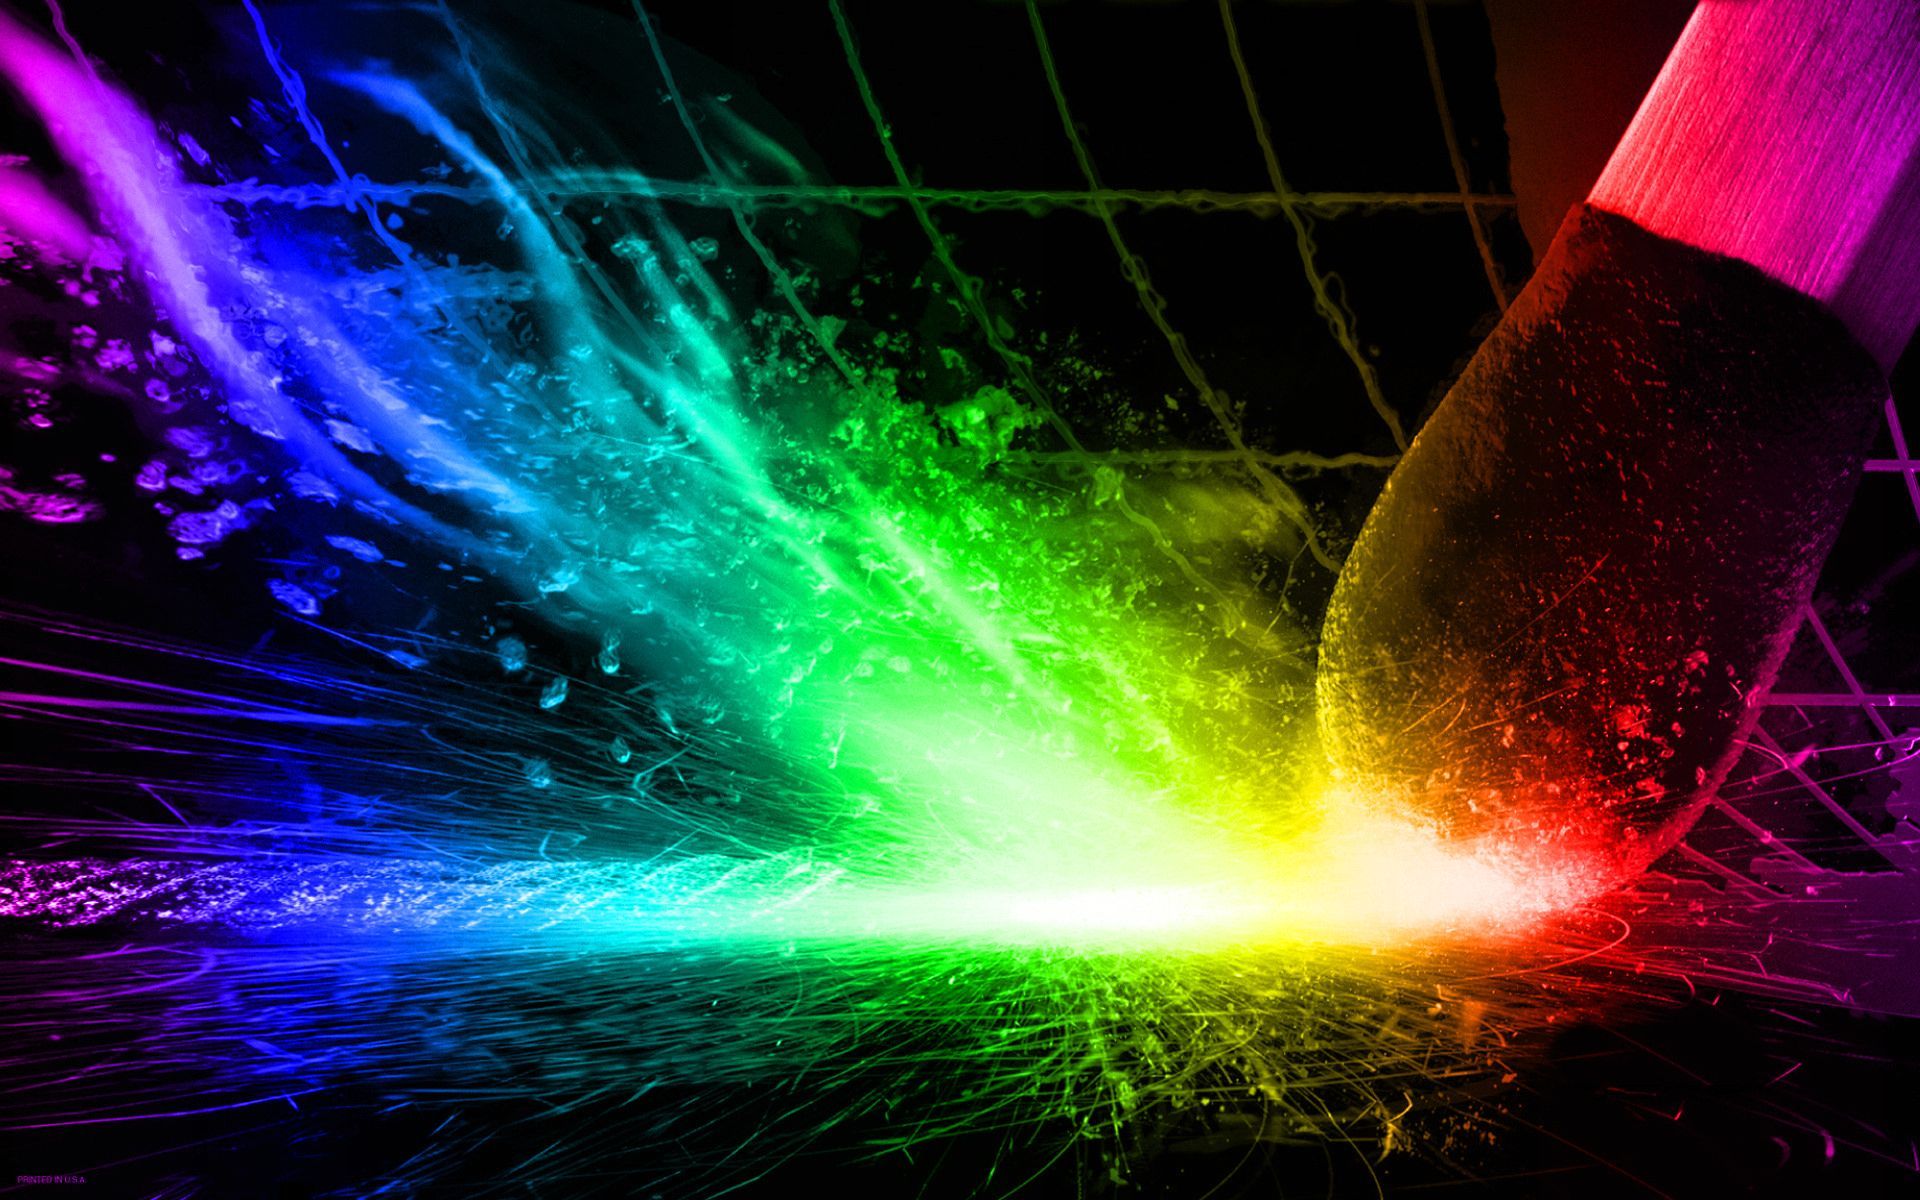 239 Colors HD Wallpapers | Backgrounds - Wallpaper Abyss